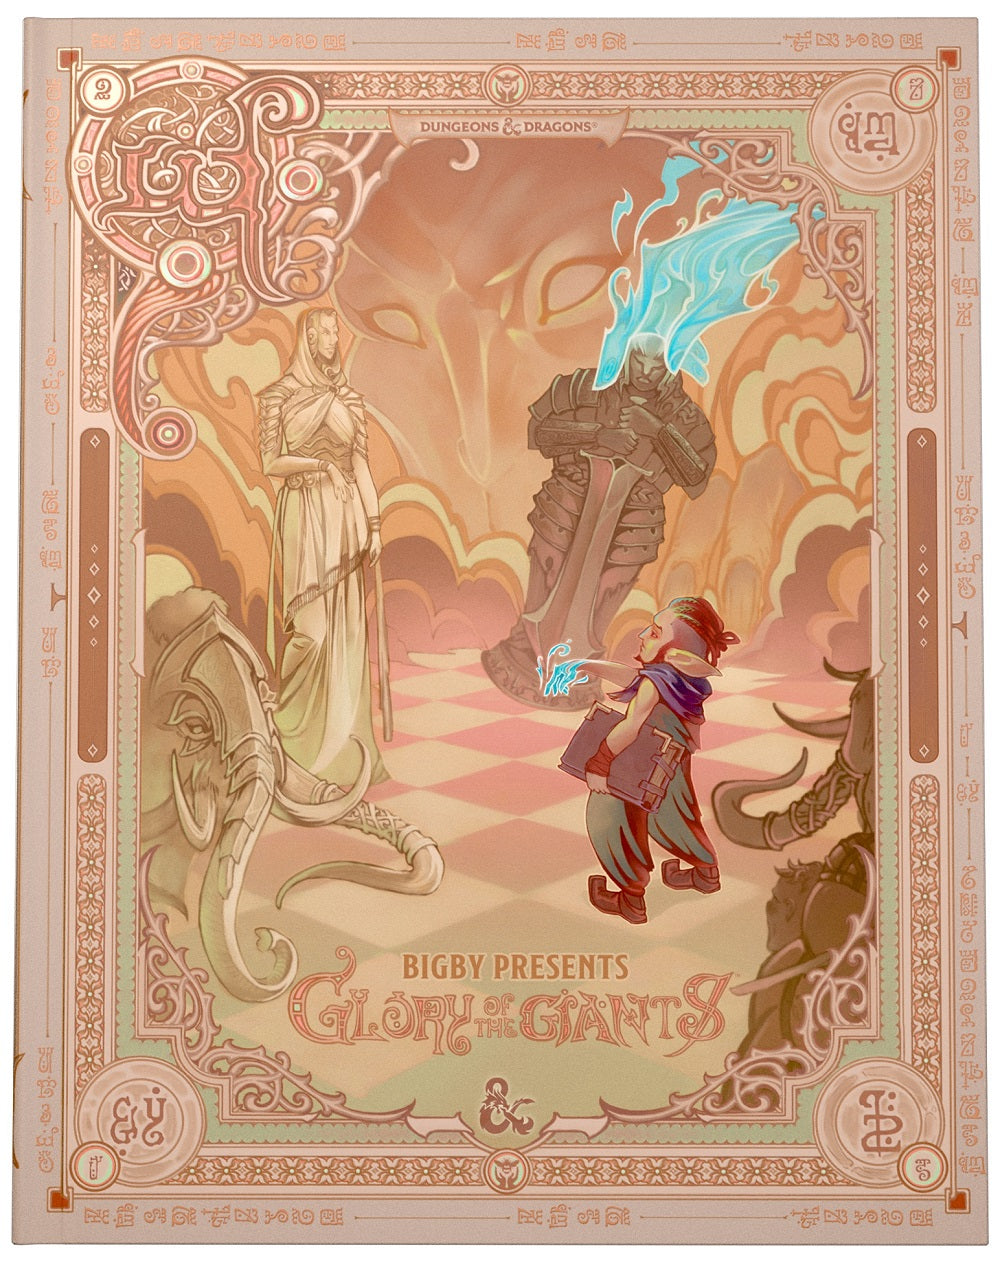 Bigby Presents: Glory of Giants (Dungeons & Dragons Expansion Book)